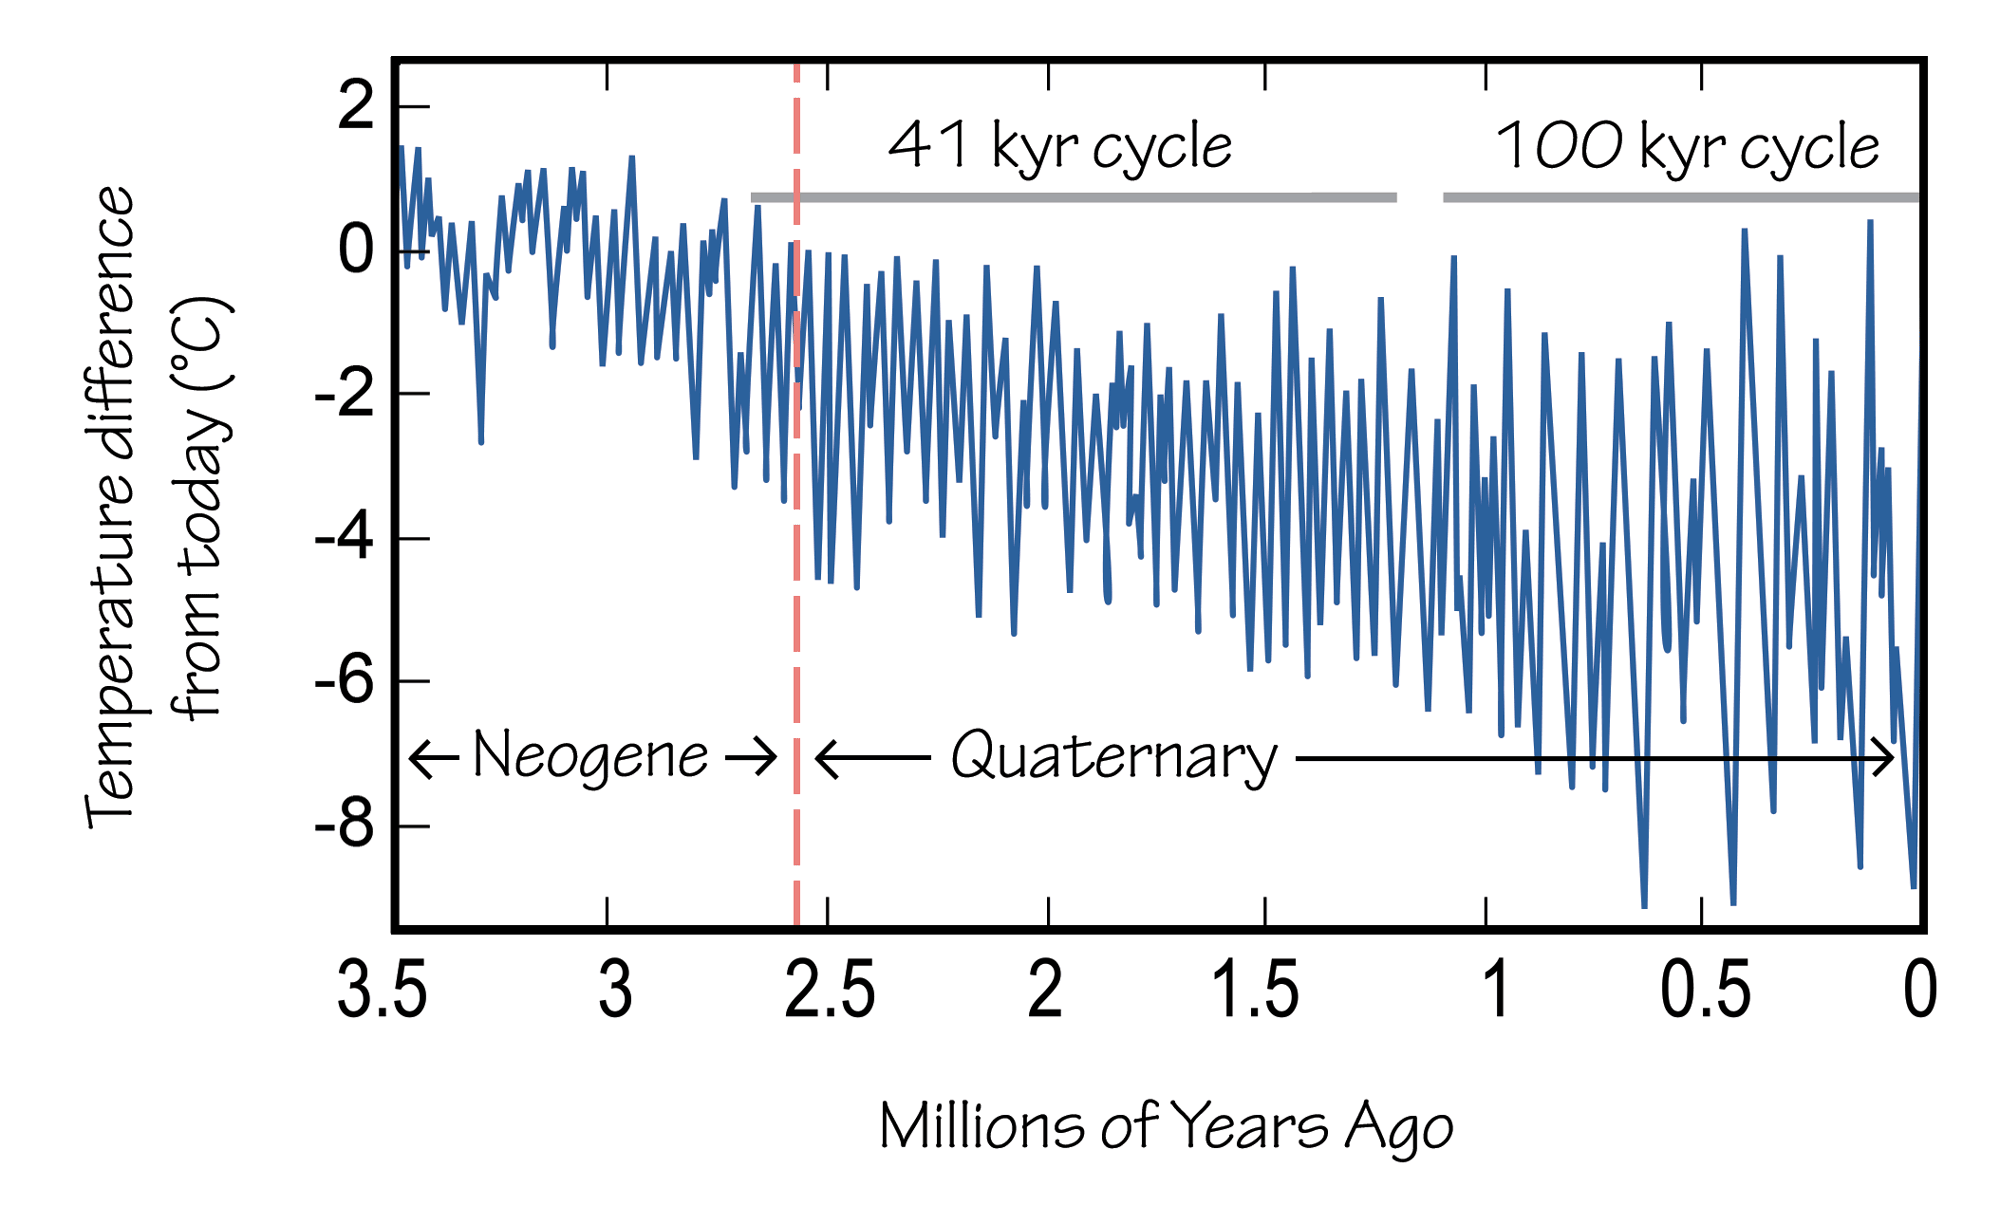 Diagram showing ocean bottom temperatures from 3.6 million years ago to the present. The diagram shows a blue line showing temperatures fluctuating from -8 degrees Celsius to +2 degrees Celsius compared to the present. The Neogene-Quaternary boundary is indicated by a red, vertical, dashed line.